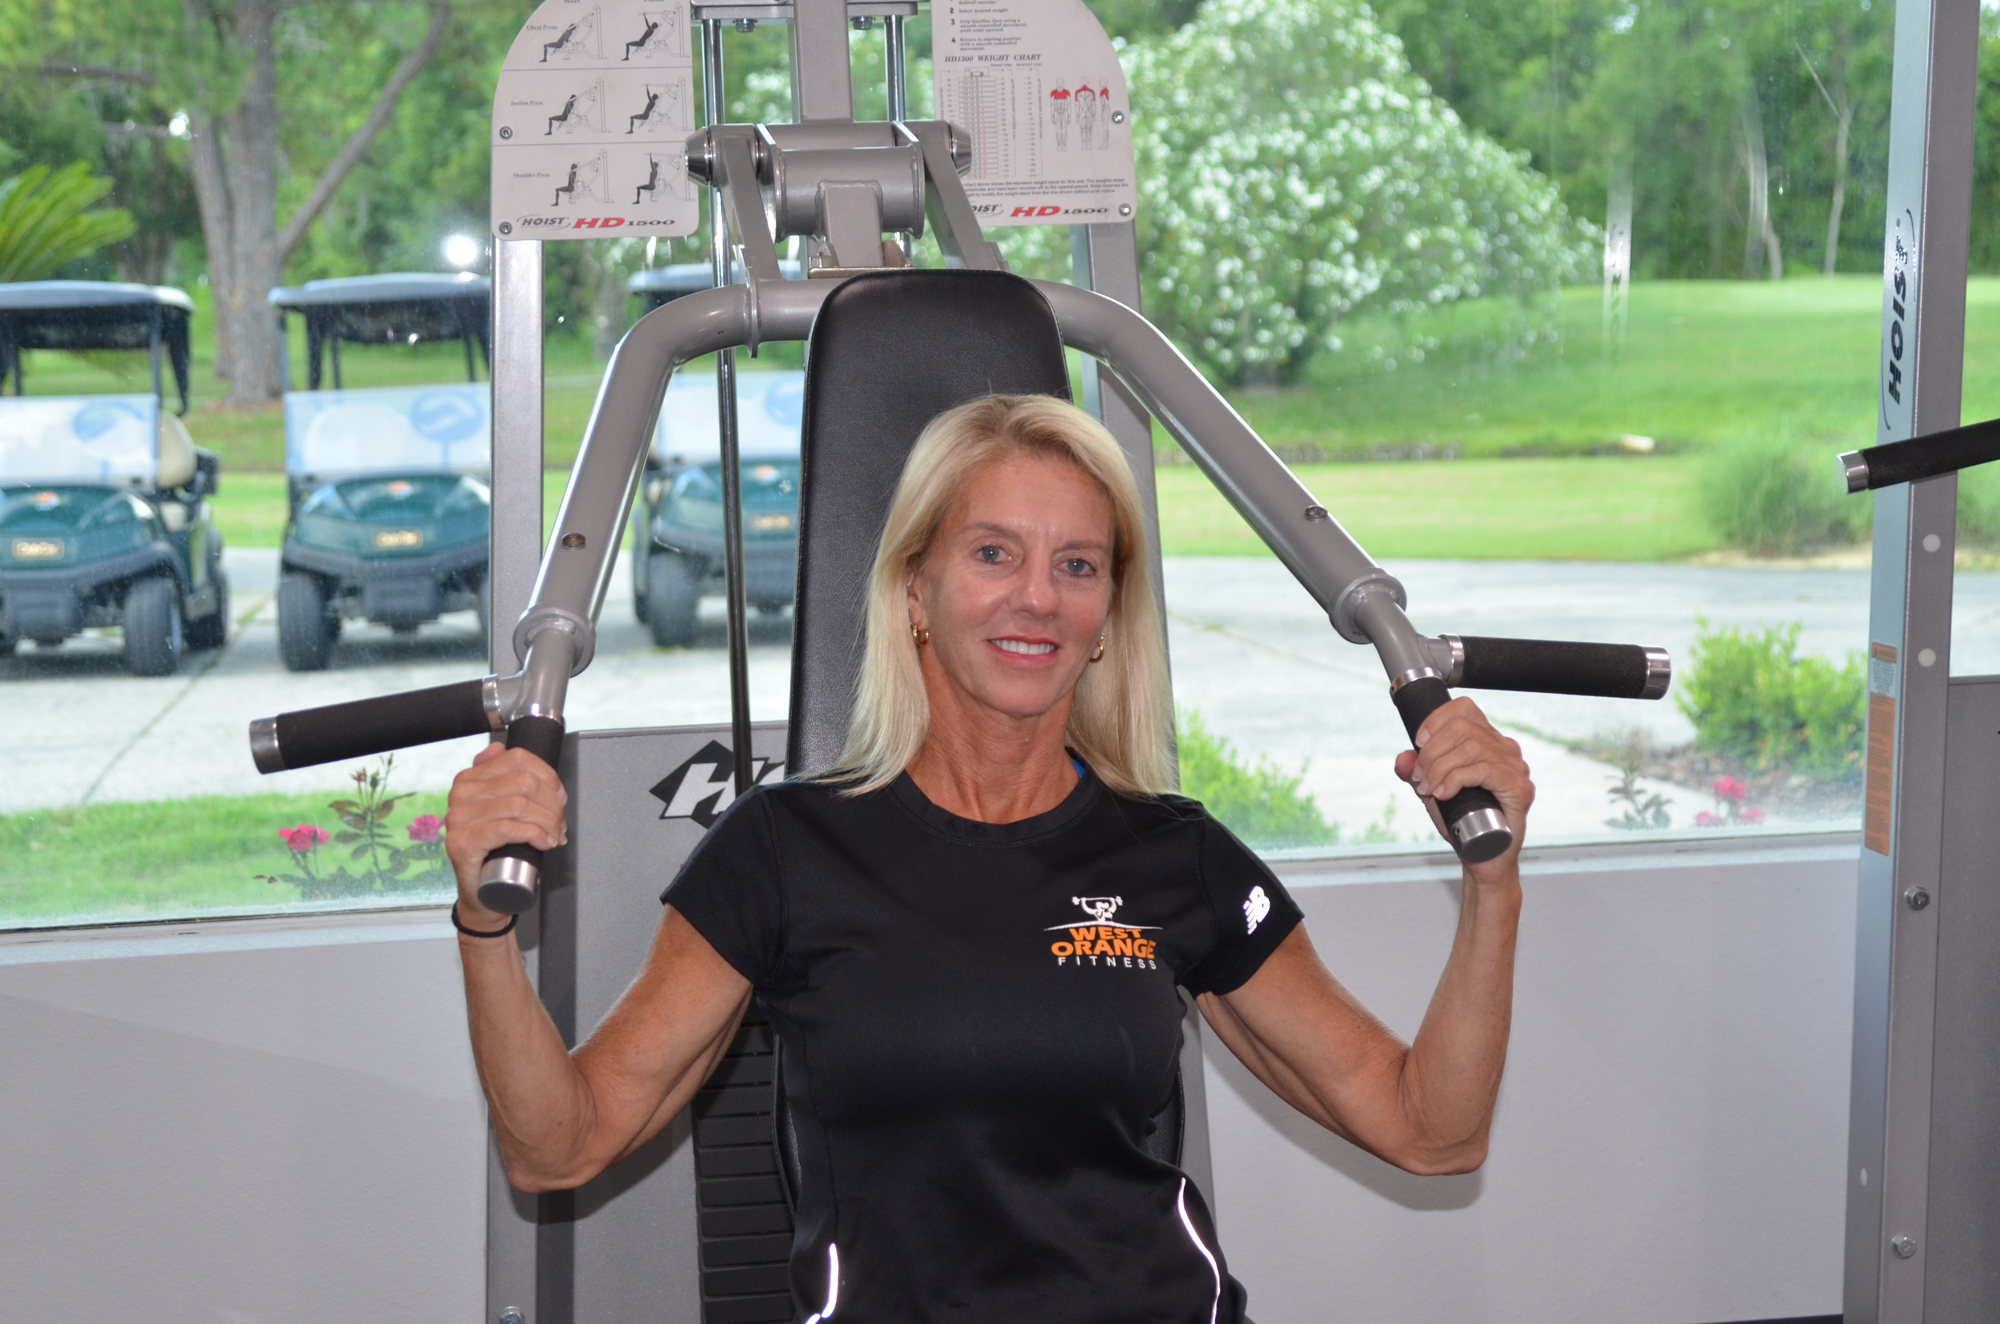 West Orange Fitness owner Gina Denison offers personal training at her new gym at the West Orange Country Club.